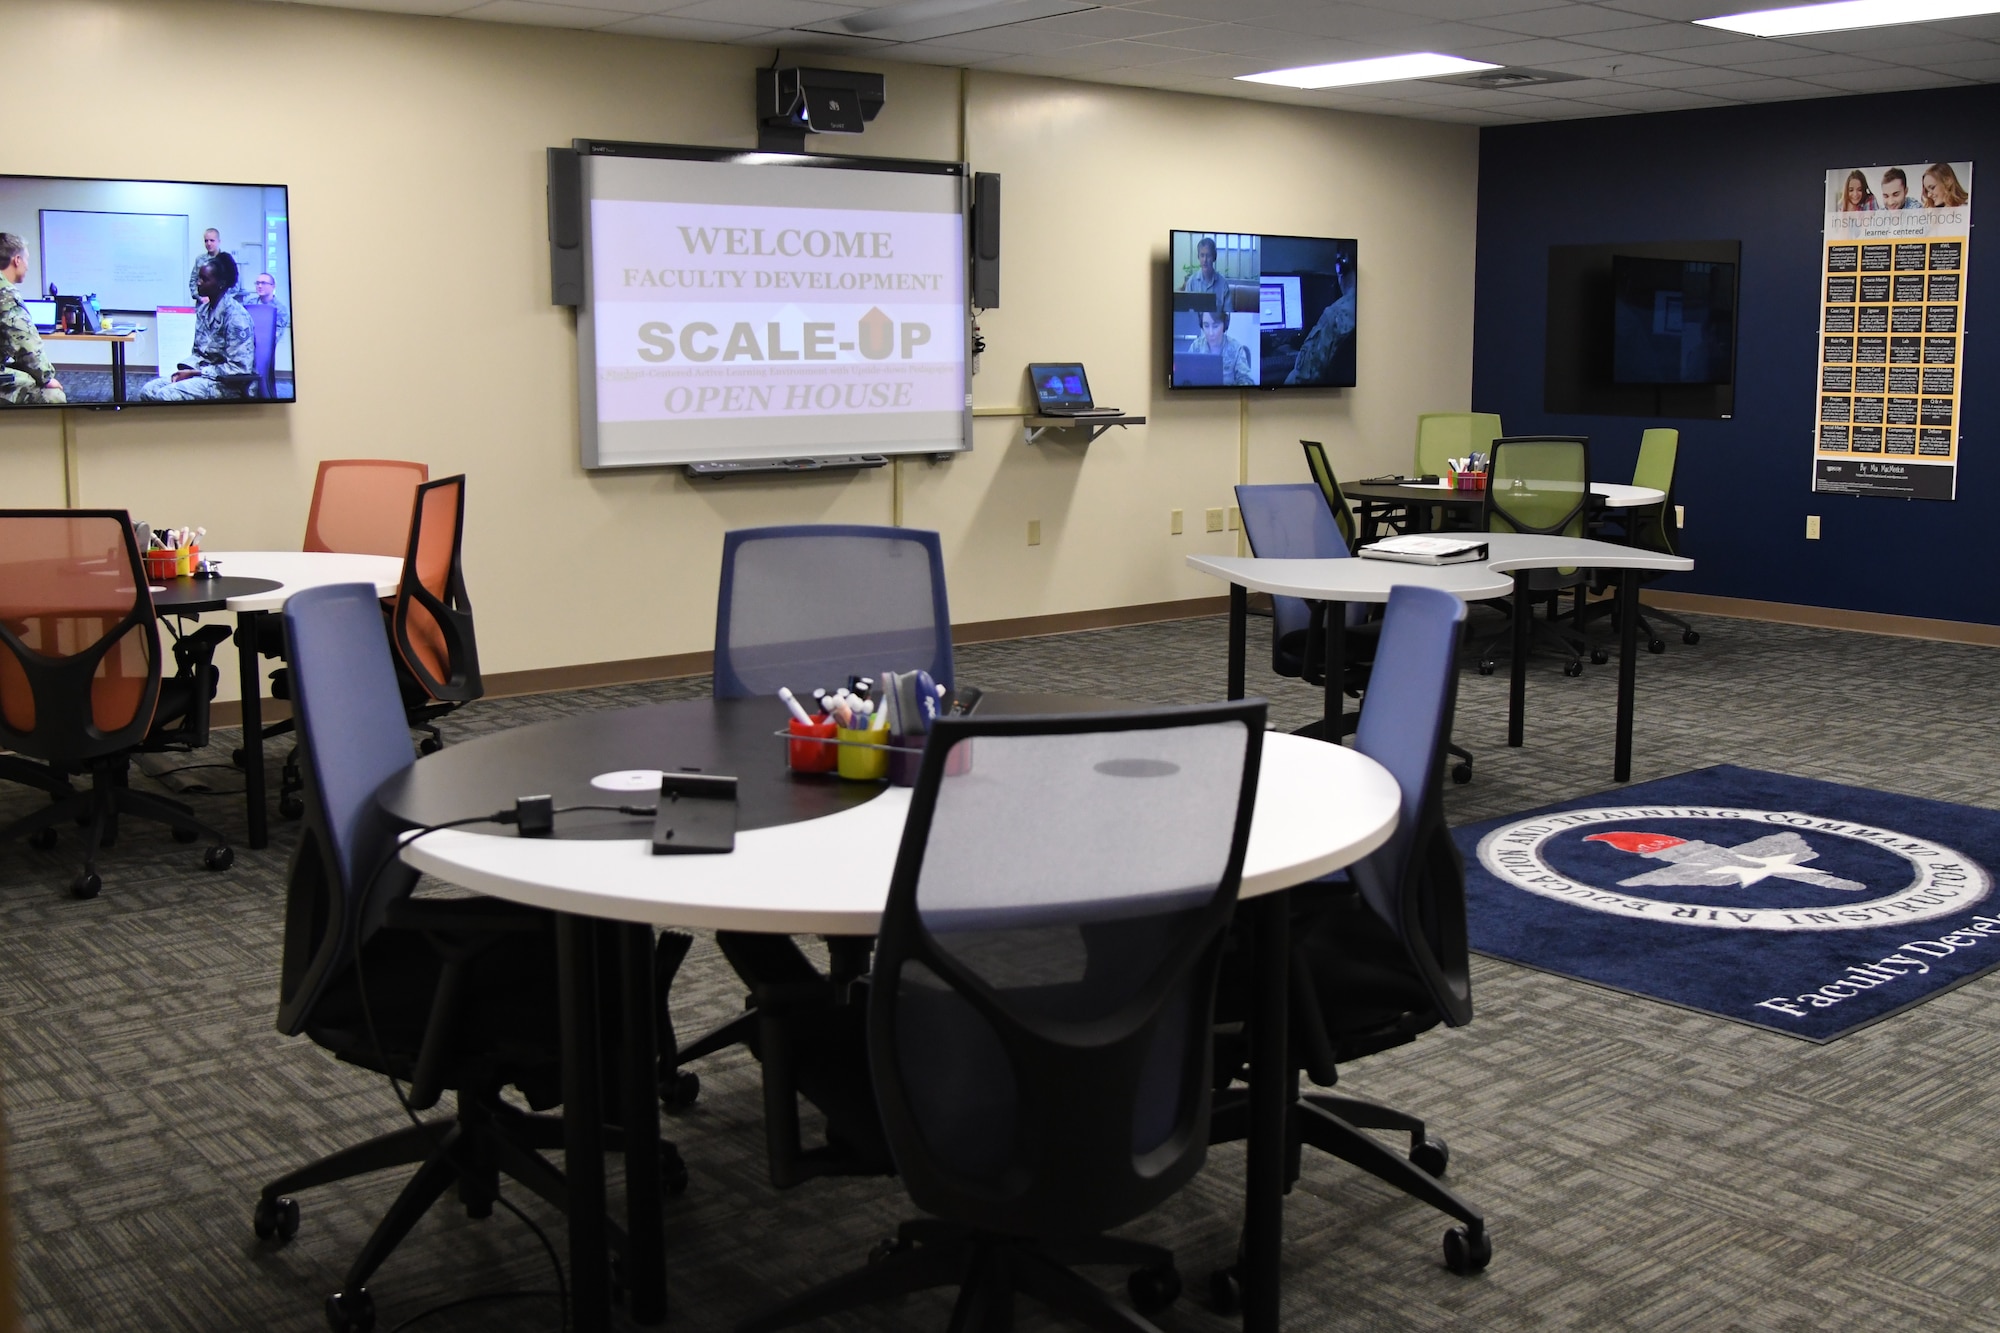 A Student-Centered Active Learning Environment with Upside-down Pedagogies class room is displayed during the SCALE-UP ribbon cutting ceremony inside Allee Hall at Keesler Air Force Base, Mississippi, Jan. 10, 2019. The SCALE-UP program was introduced by the 81st Training Support Squadron as a way to bring new technology and teaching techniques into Keesler classrooms to put more focus on students and their success in Air Force education. (U.S. Air Force photo by Kemberly Groue)